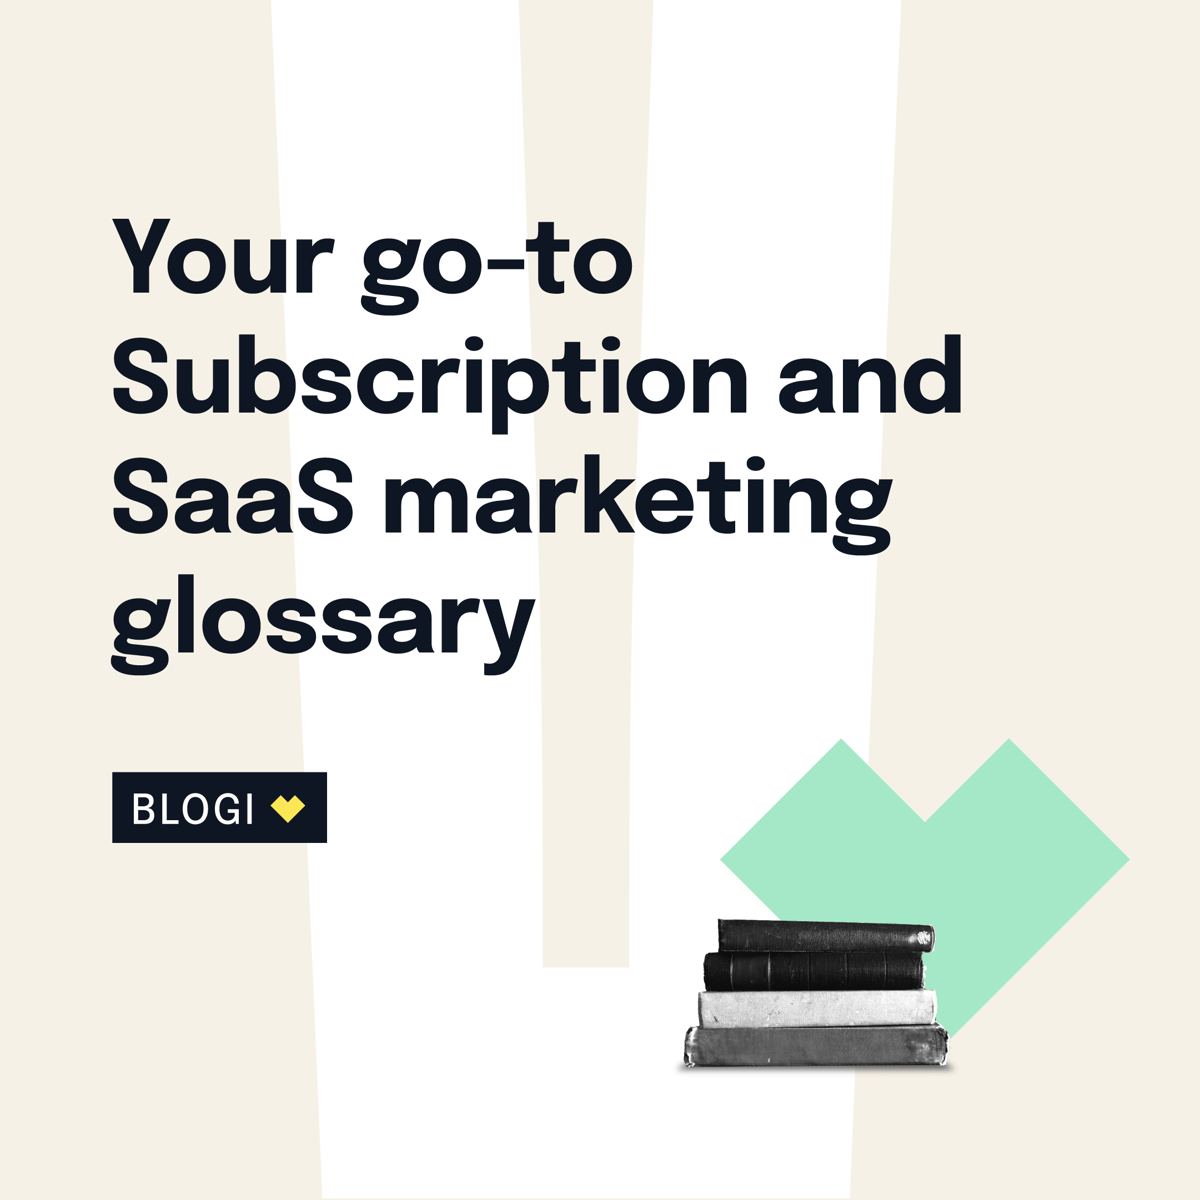 Your go-to Subscription and SaaS marketing glossary